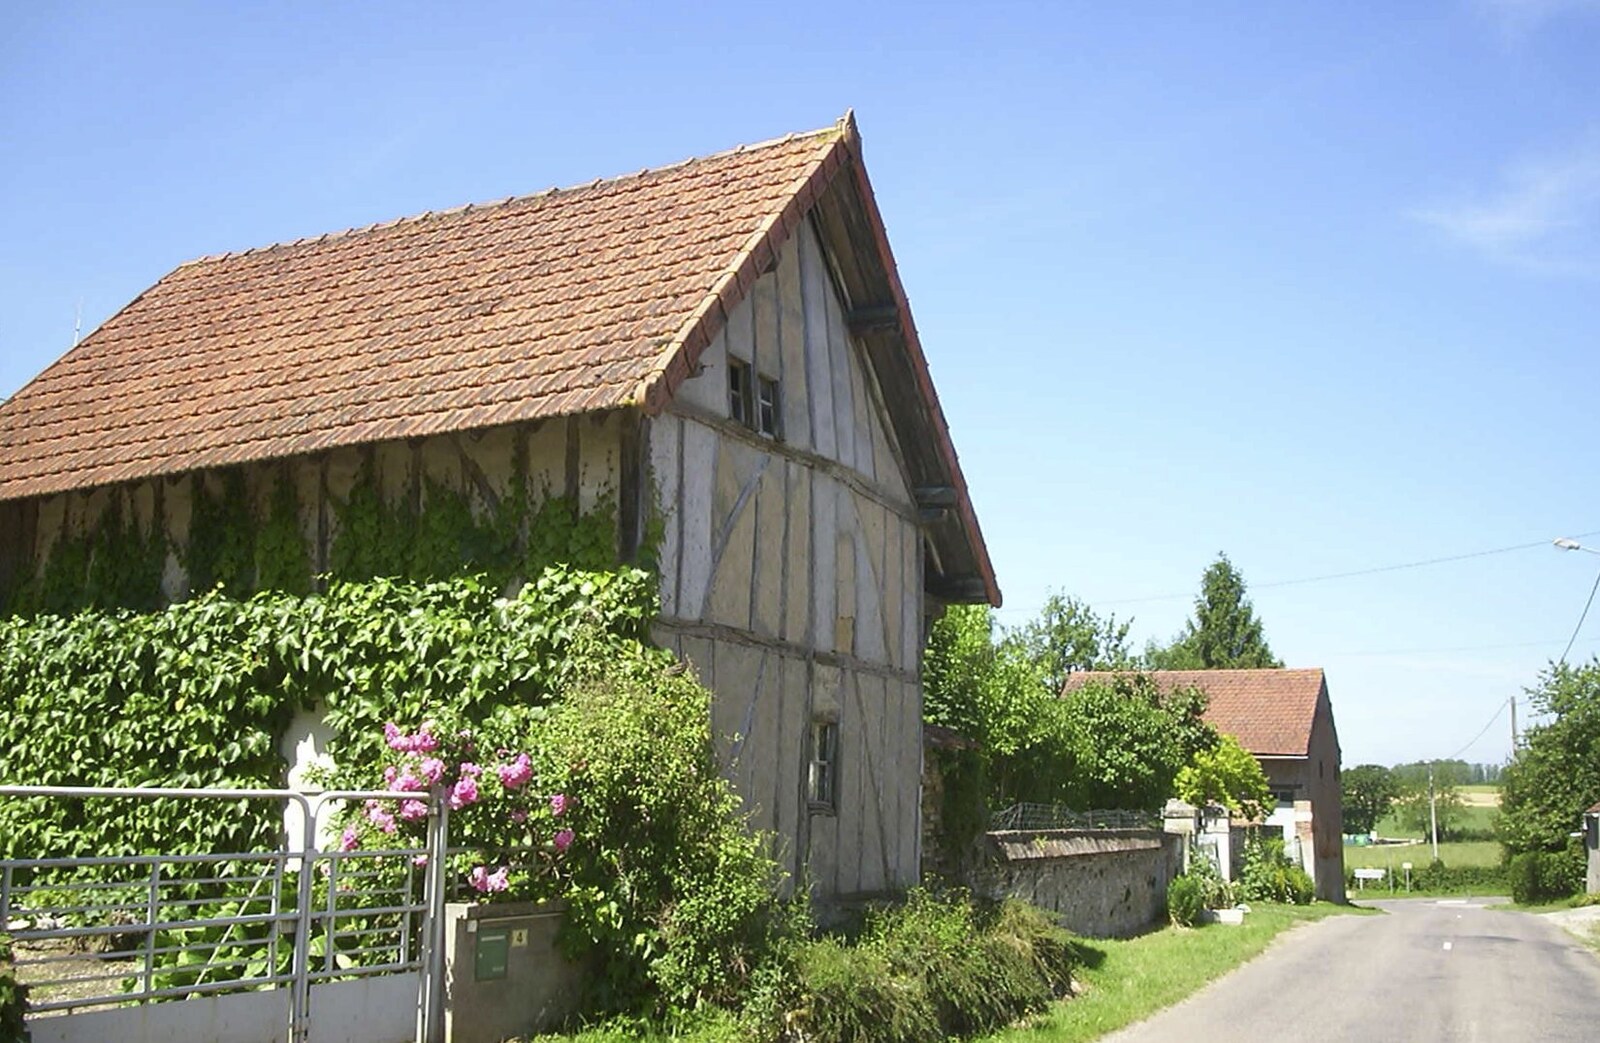 A timber-framed building from A Short Holiday in Chivres, Burgundy, France - 21st July 2001